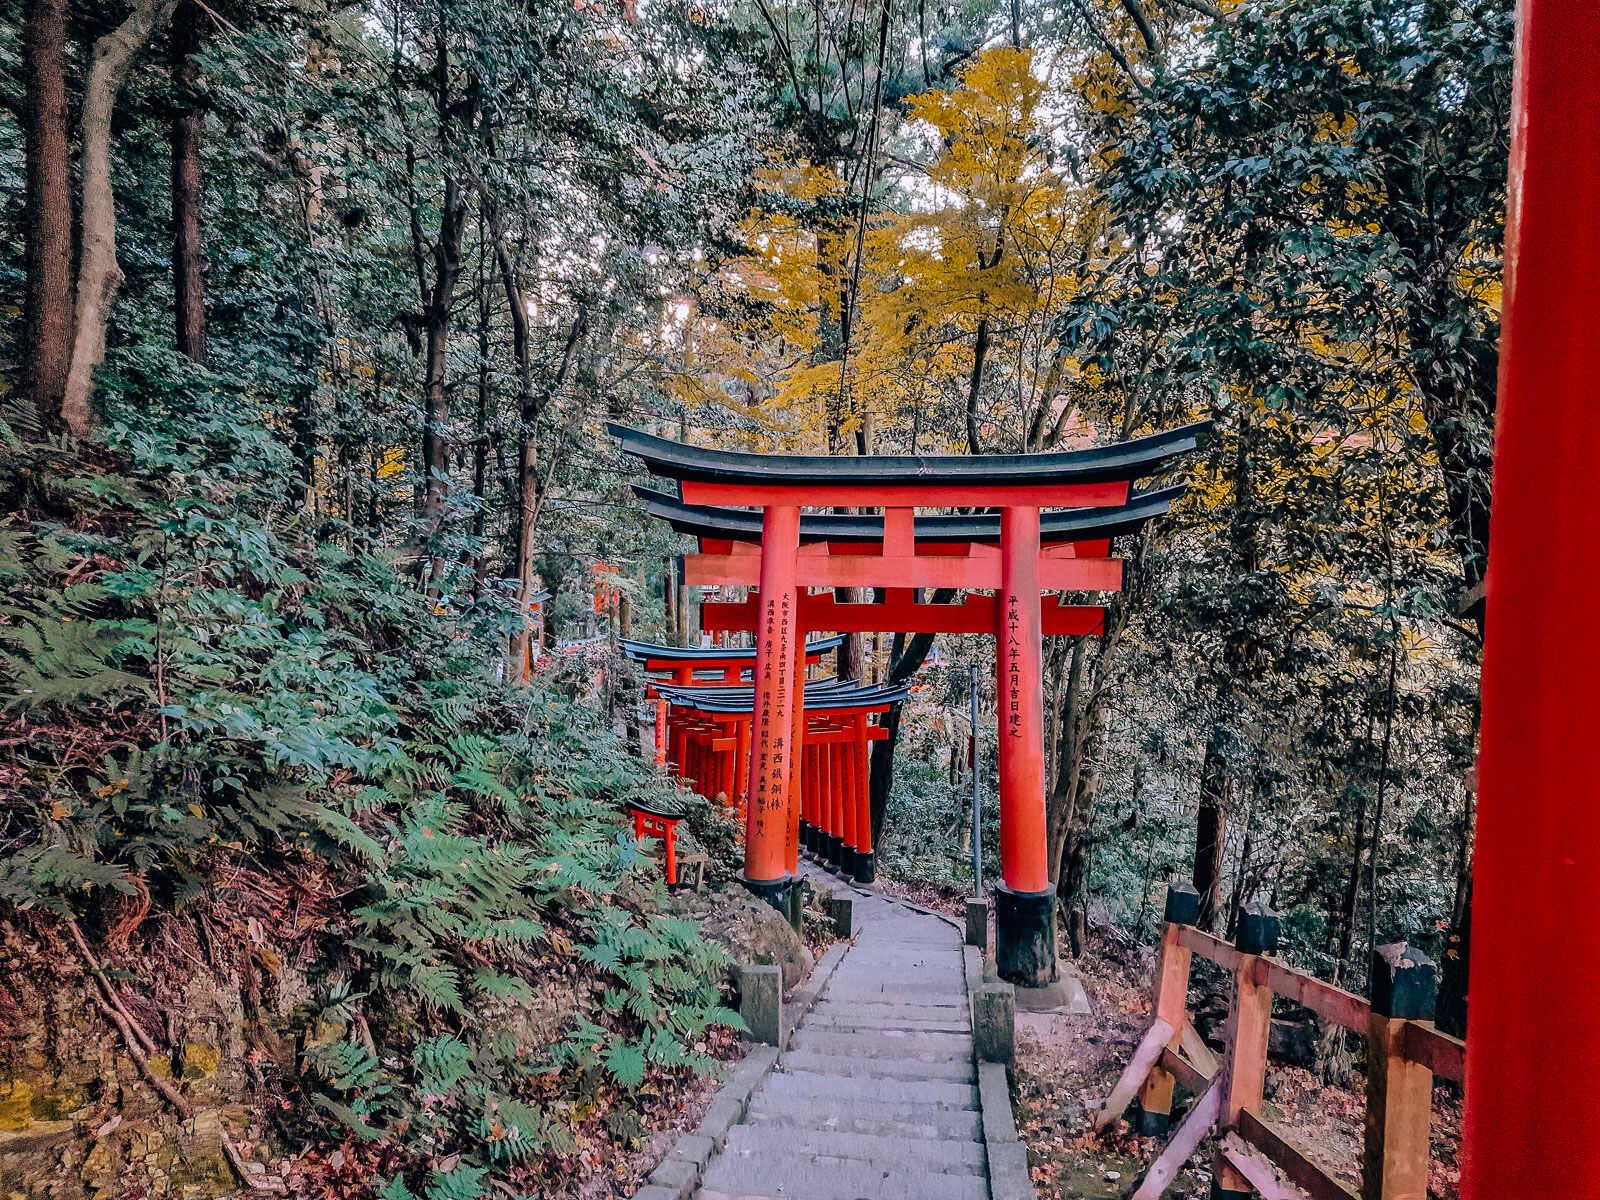 steps on a nature trail with several orange torii gates over the path